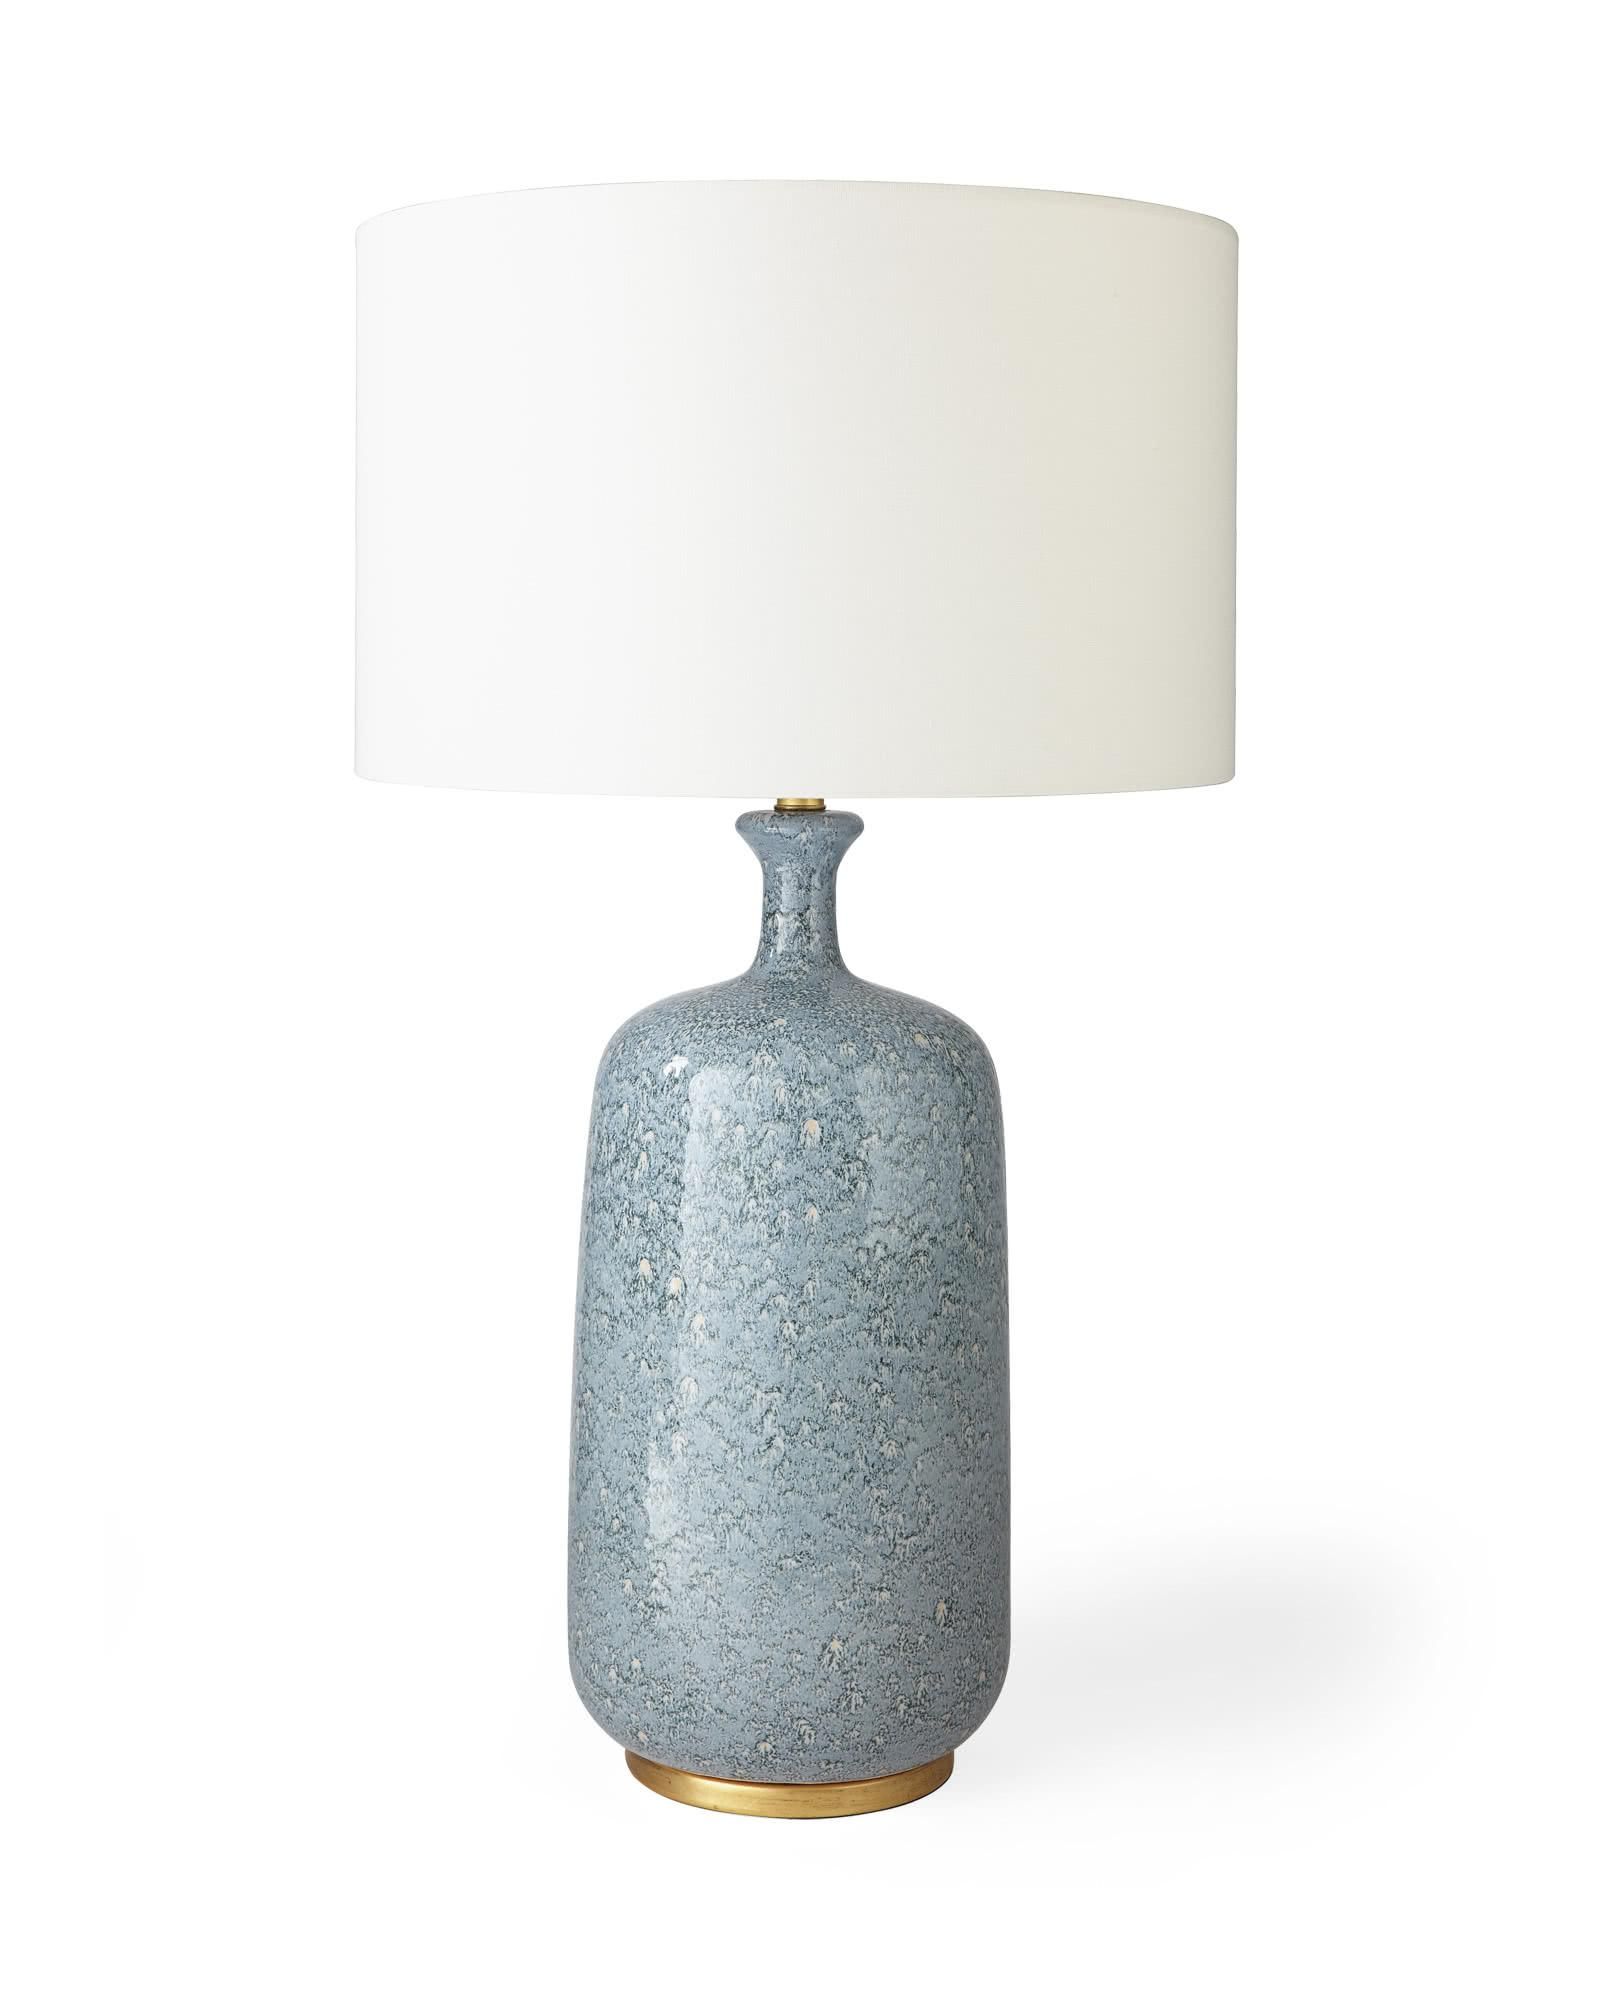 Hattie Table Lamp | Serena and Lily